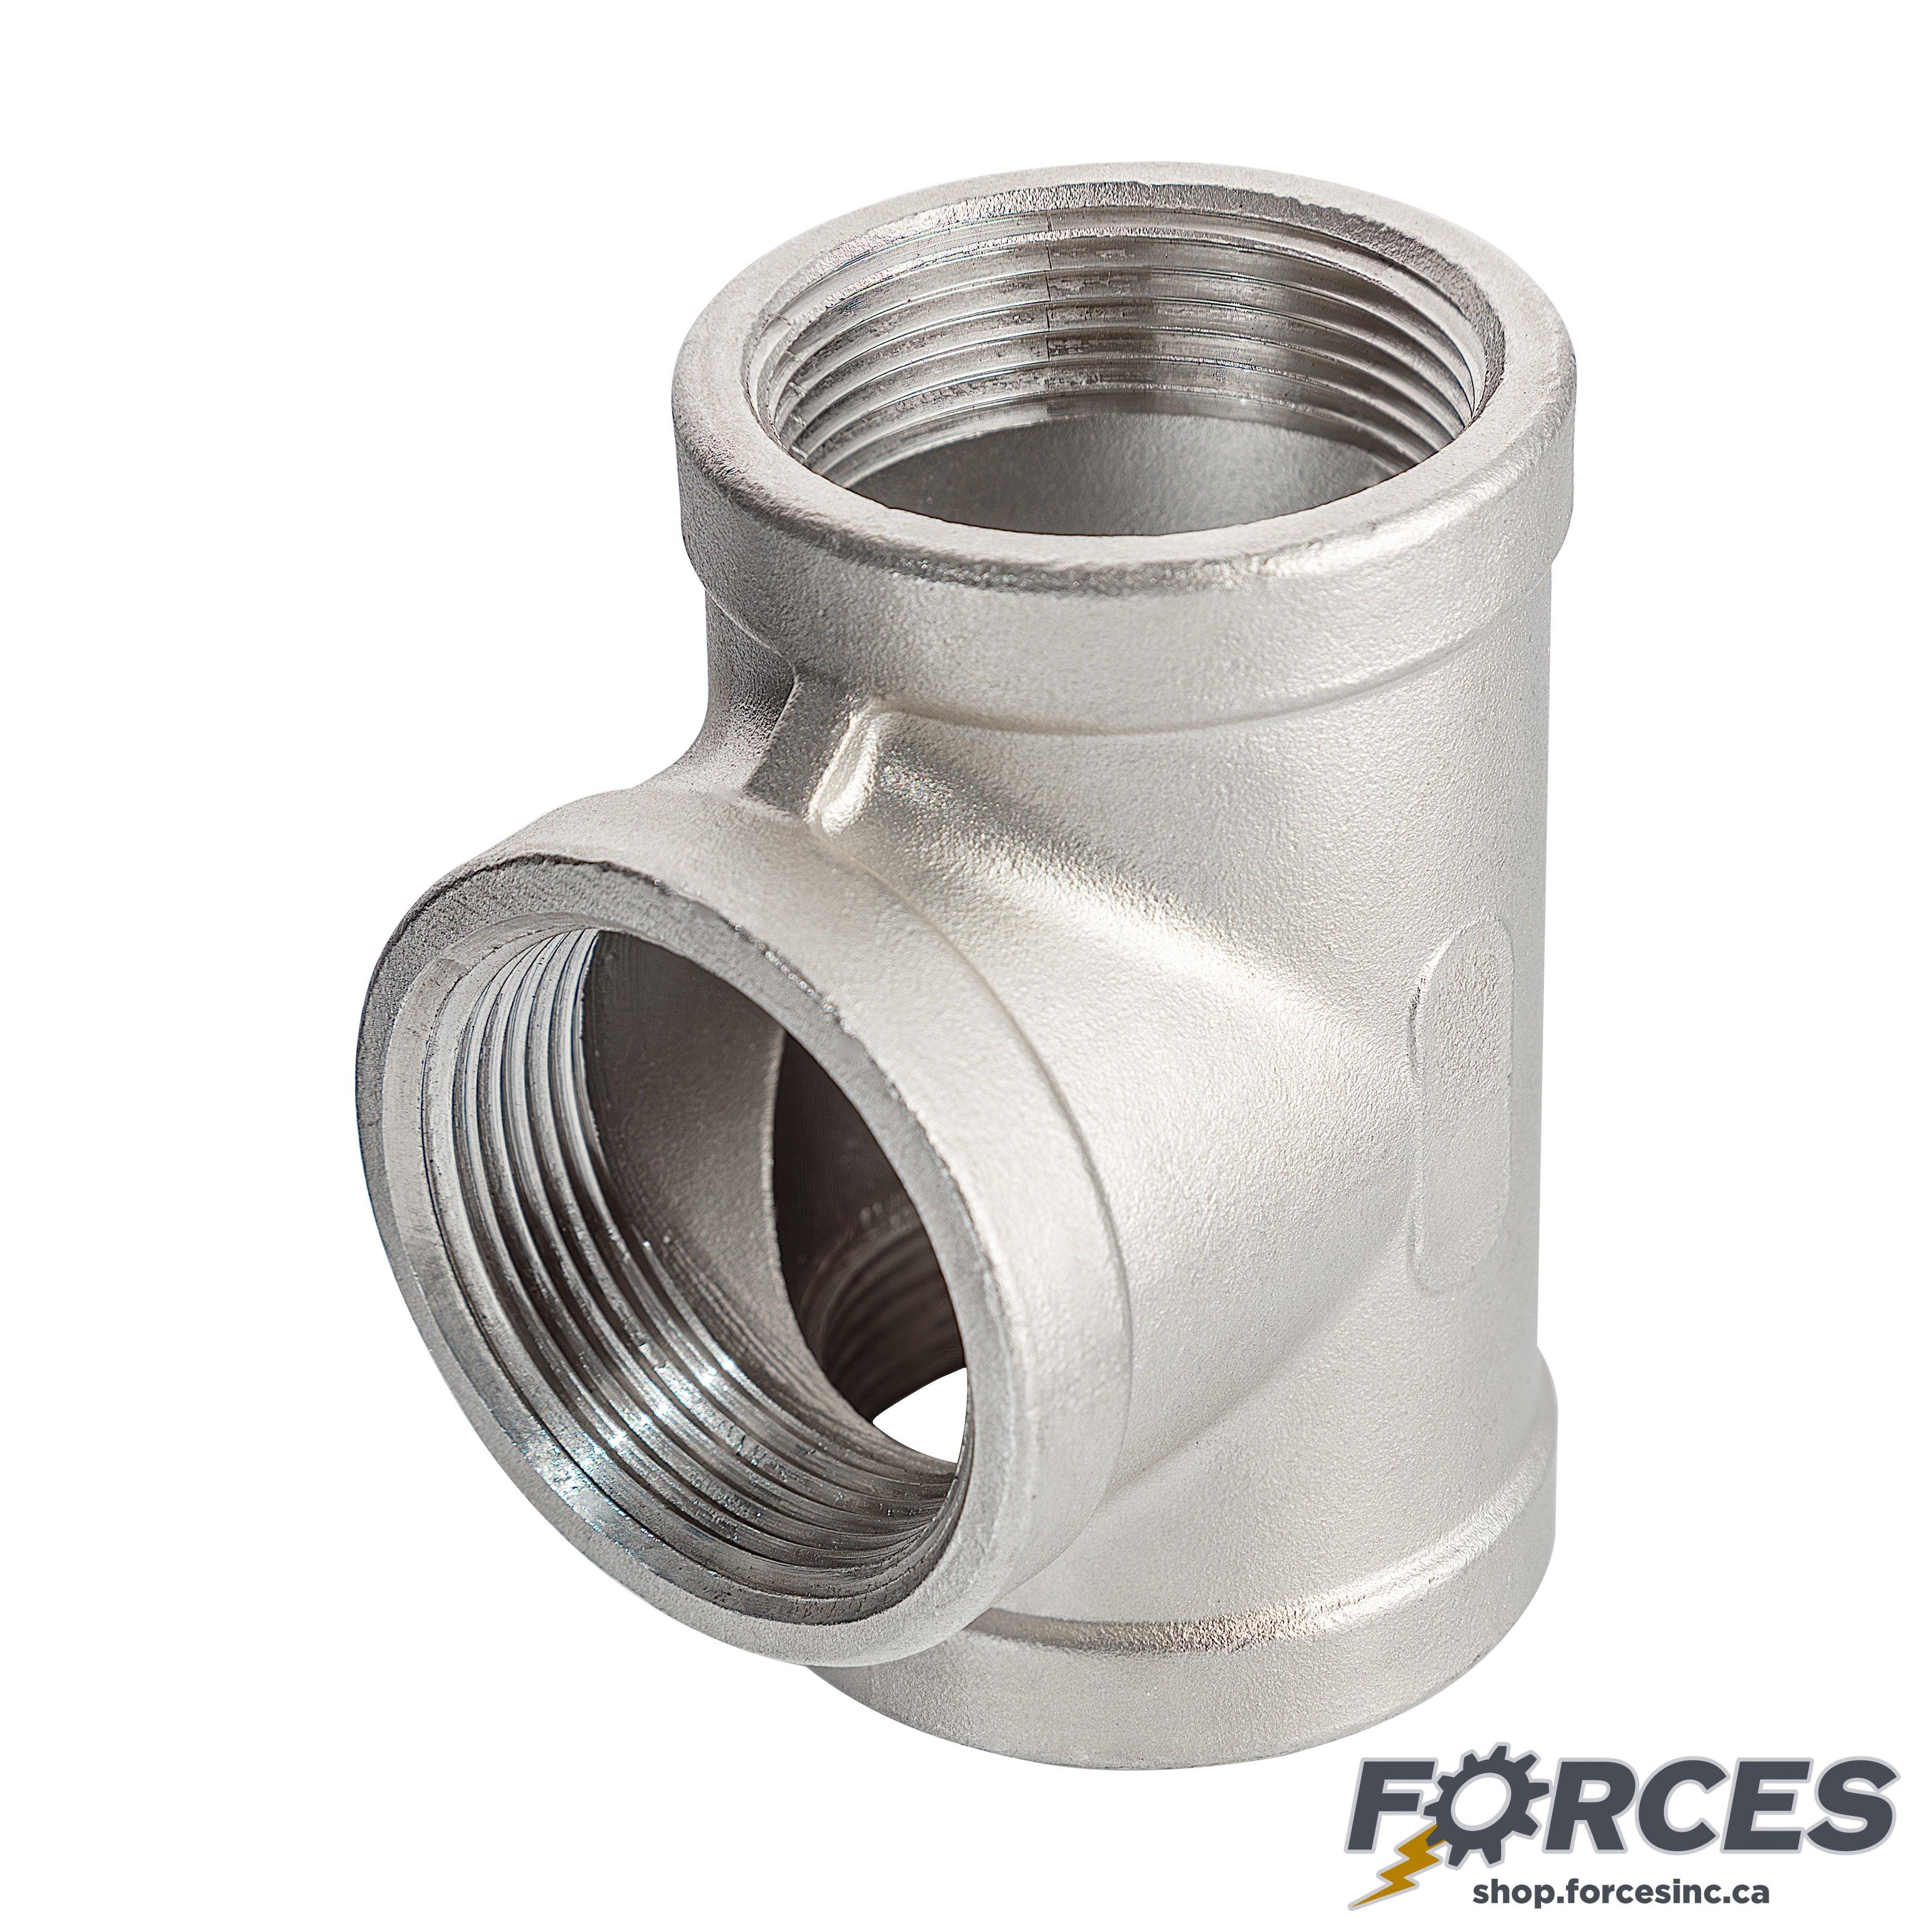 1/4" Tee NPT #150 - Stainless Steel 316 - Forces Inc